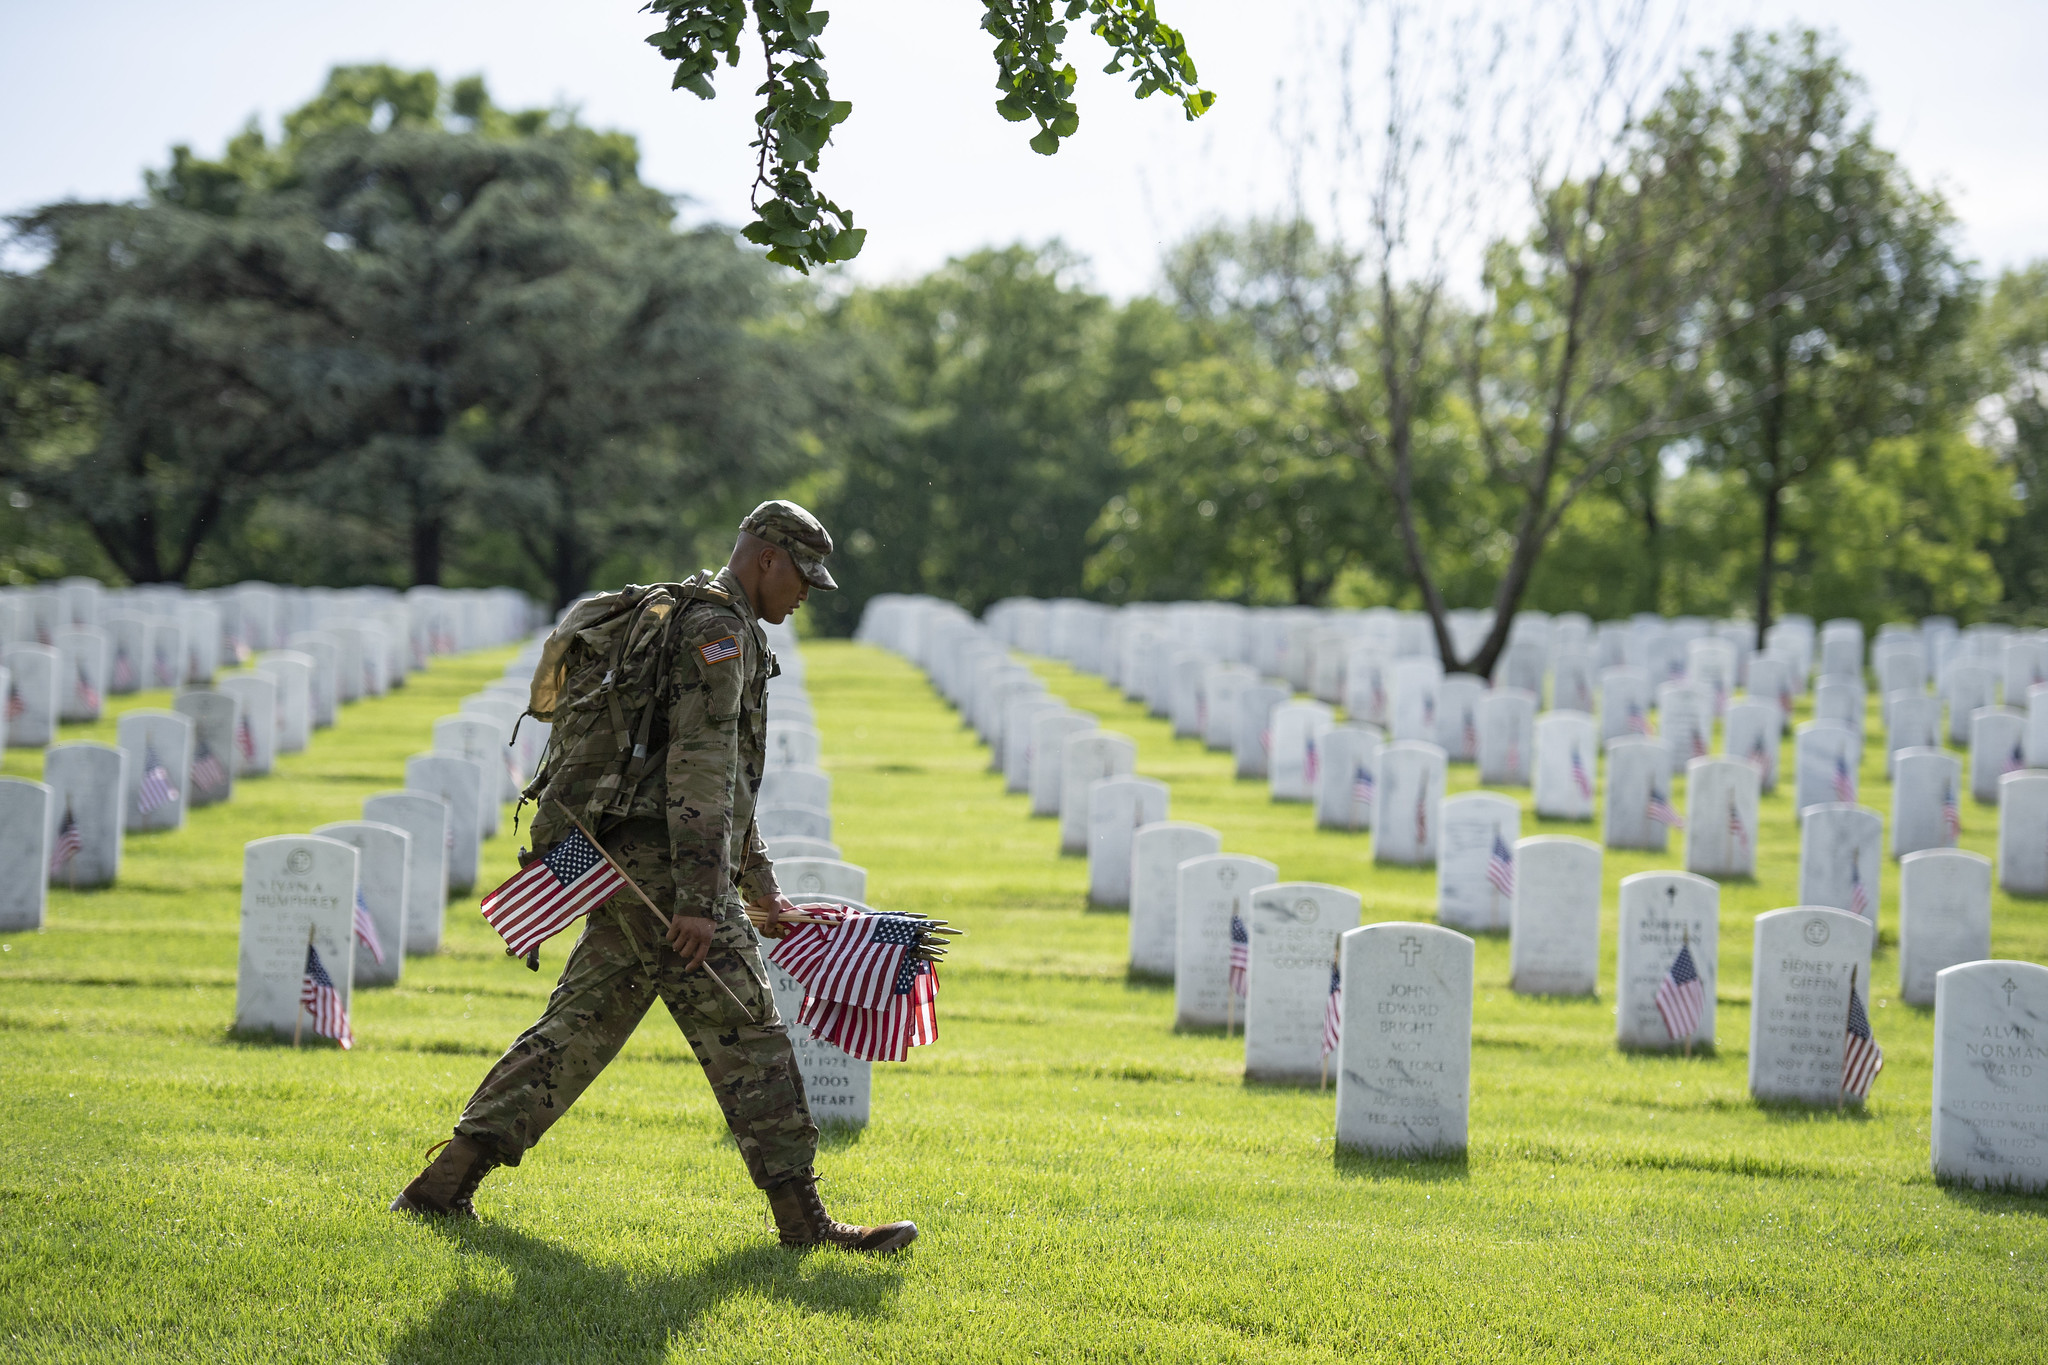 A uniformed soldier places American flags in front of gravestones at Arlington National Cemetery, for Memorial Day